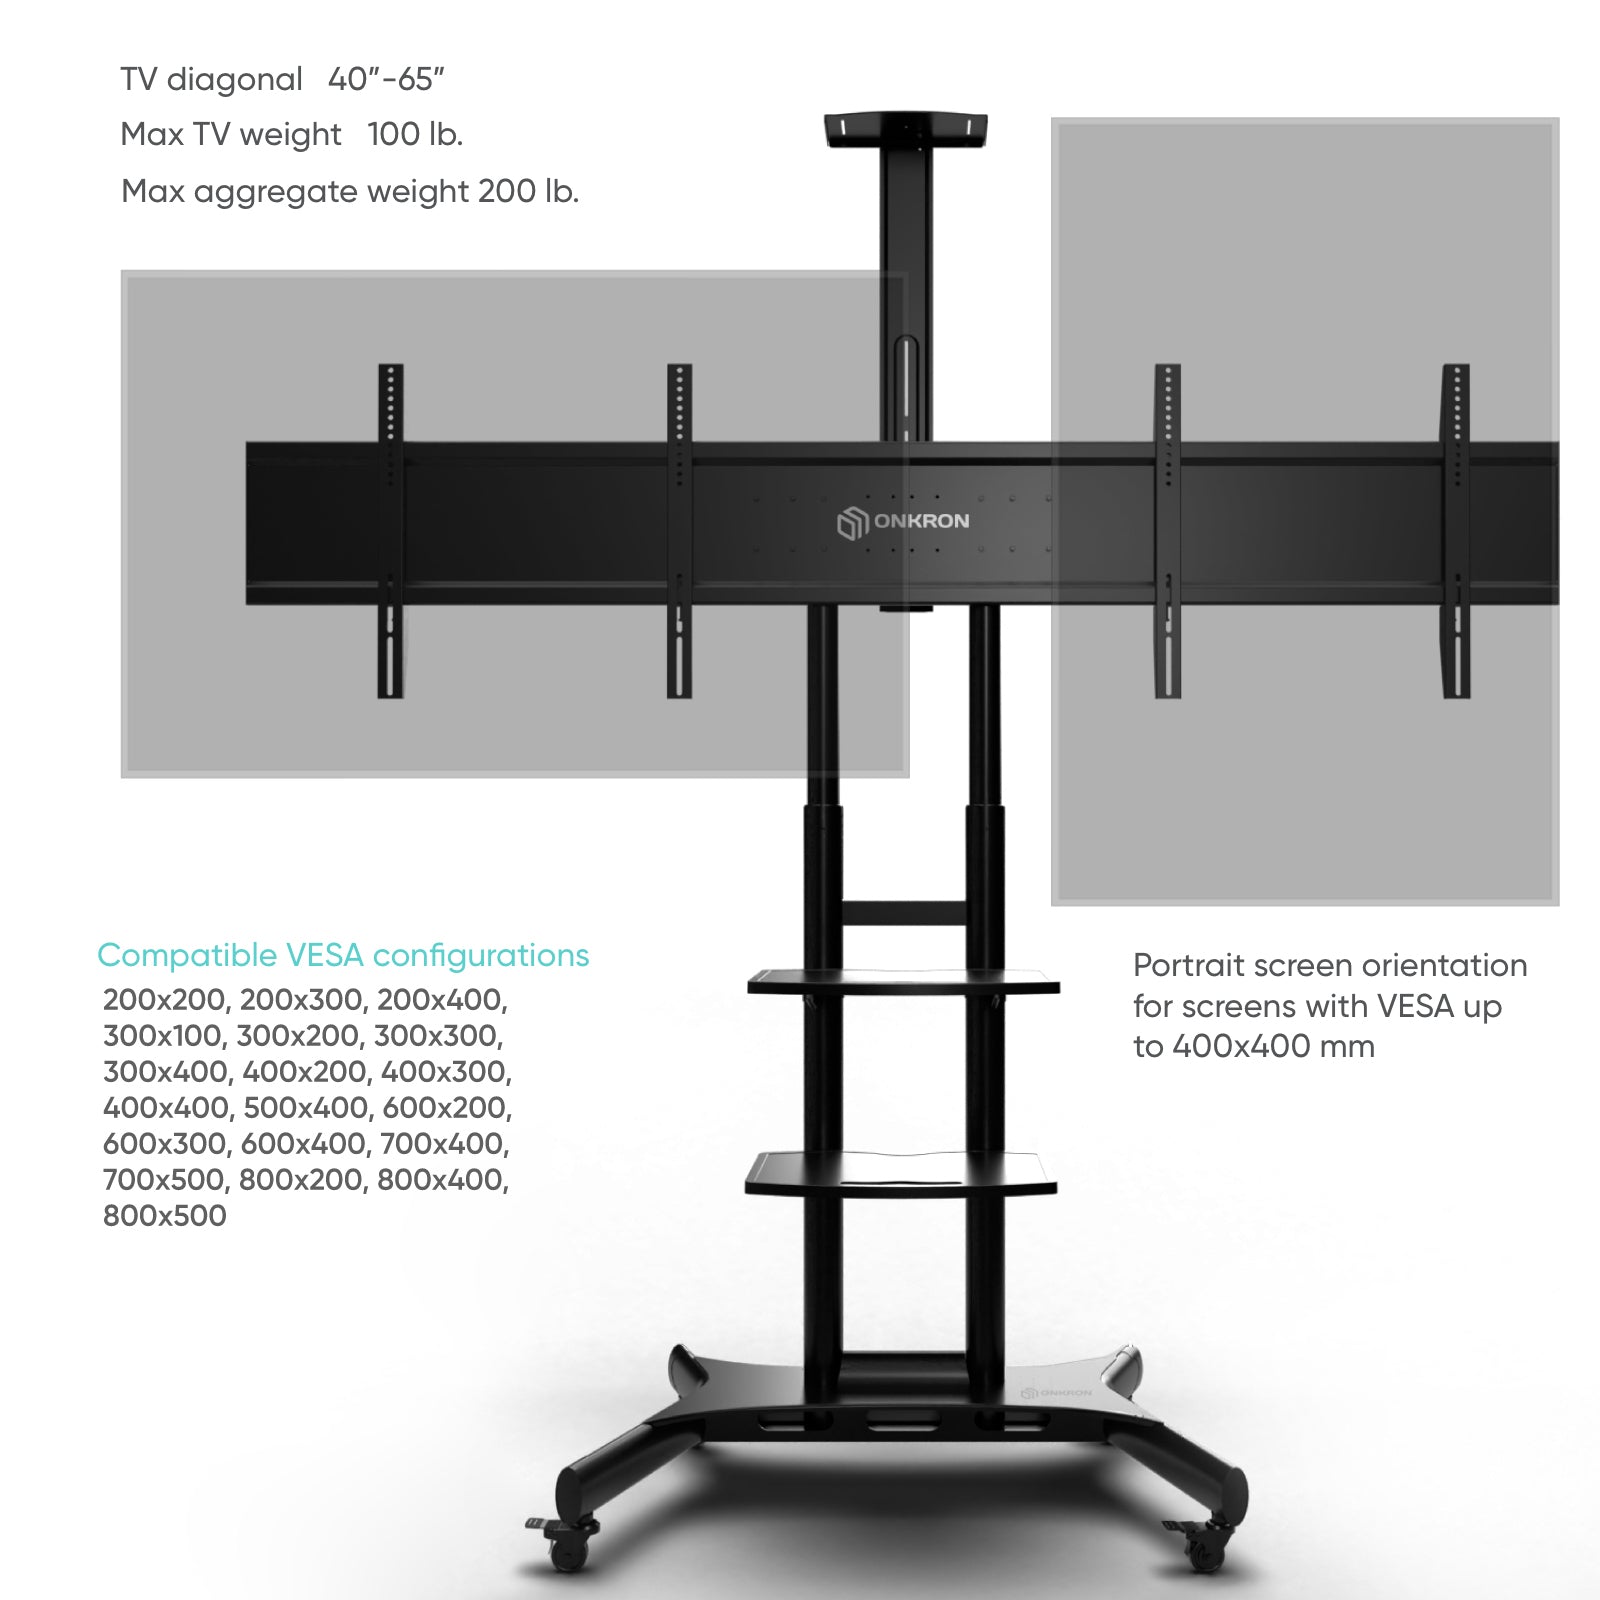 Dual Mobile TV Stand for Two 40''– 65'' Screens up to 100 lb. each ONKRON TS1881DV, Black